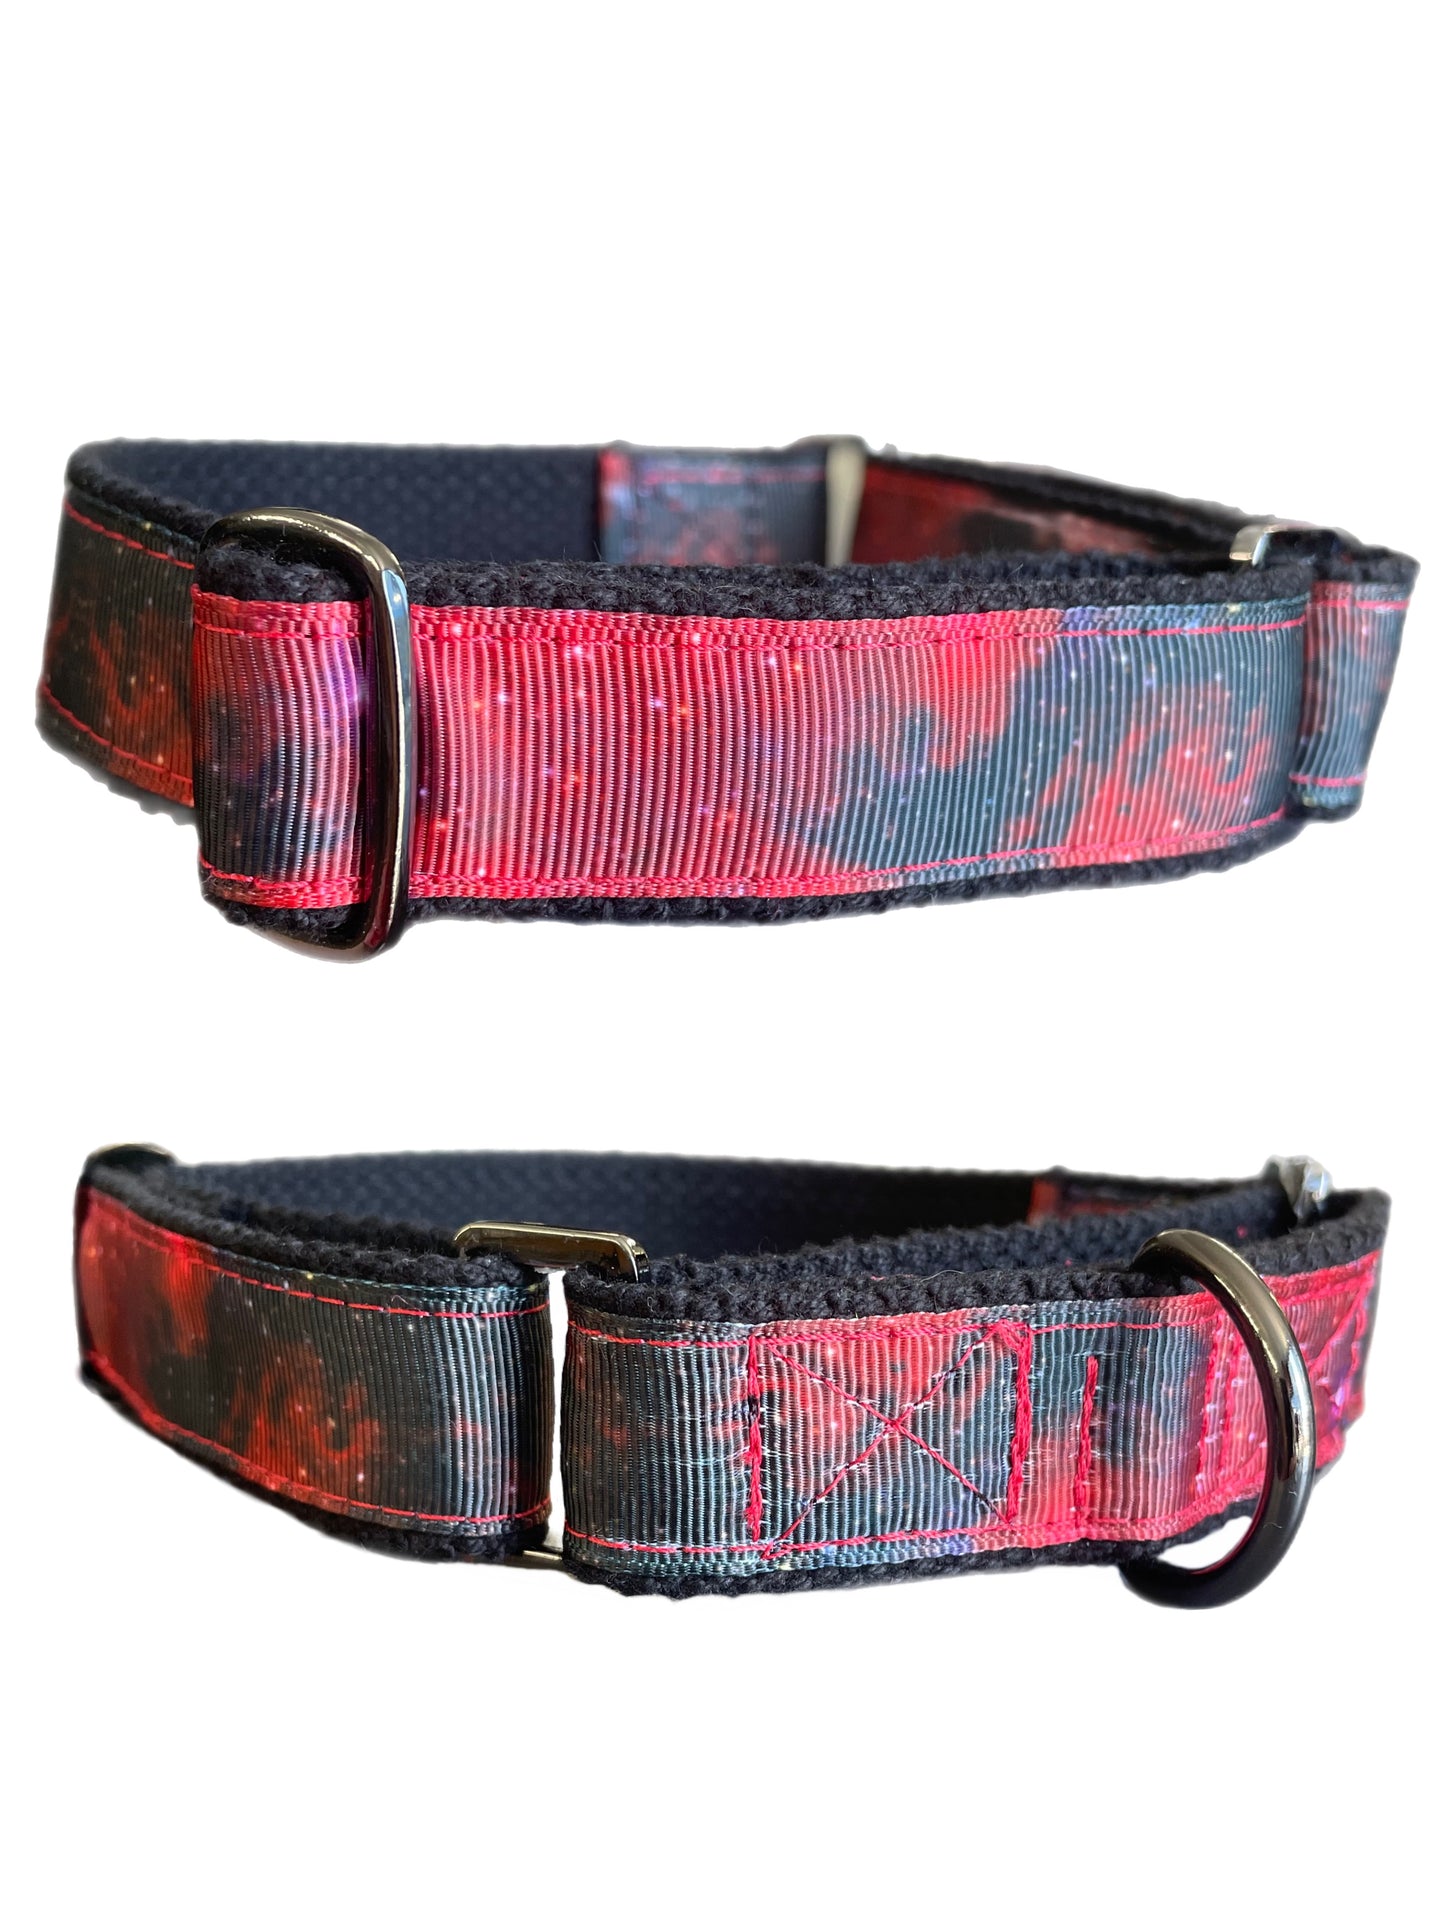 Greyhound Martingale 25mm house collar with galaxy design on red